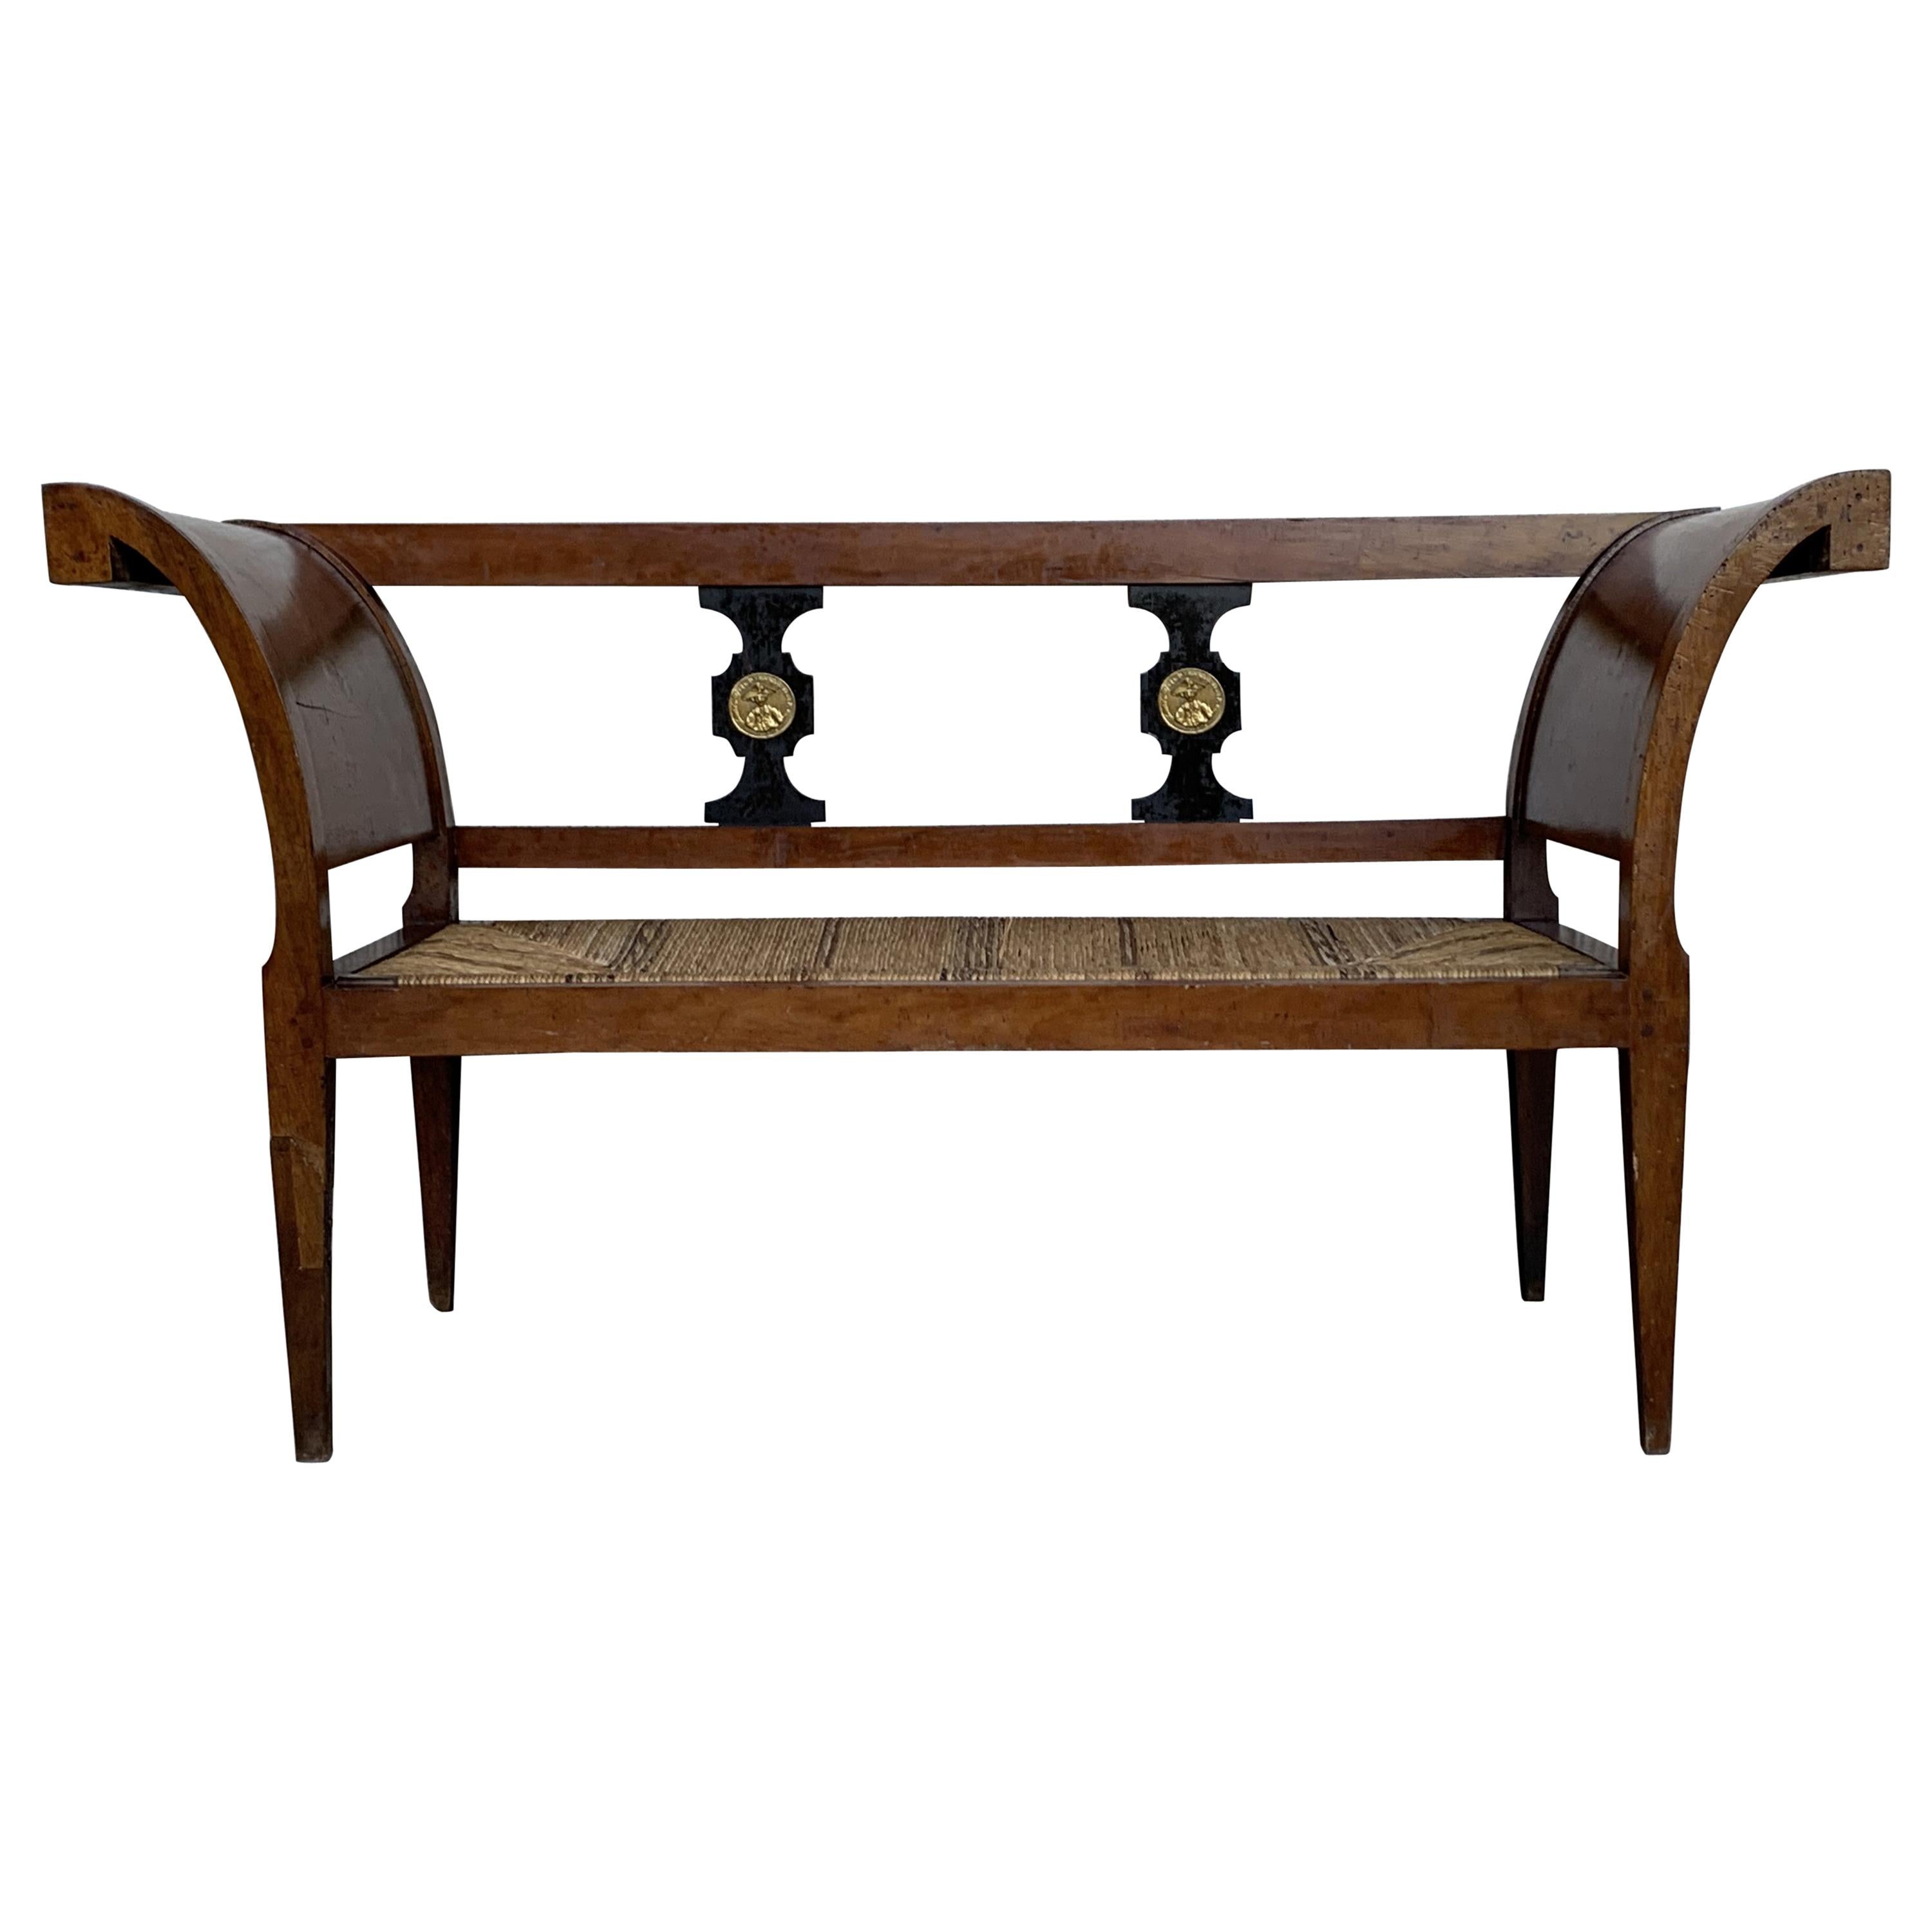 20th Century Empire Bench in Walnut with Ebonized Details and Caned Seat